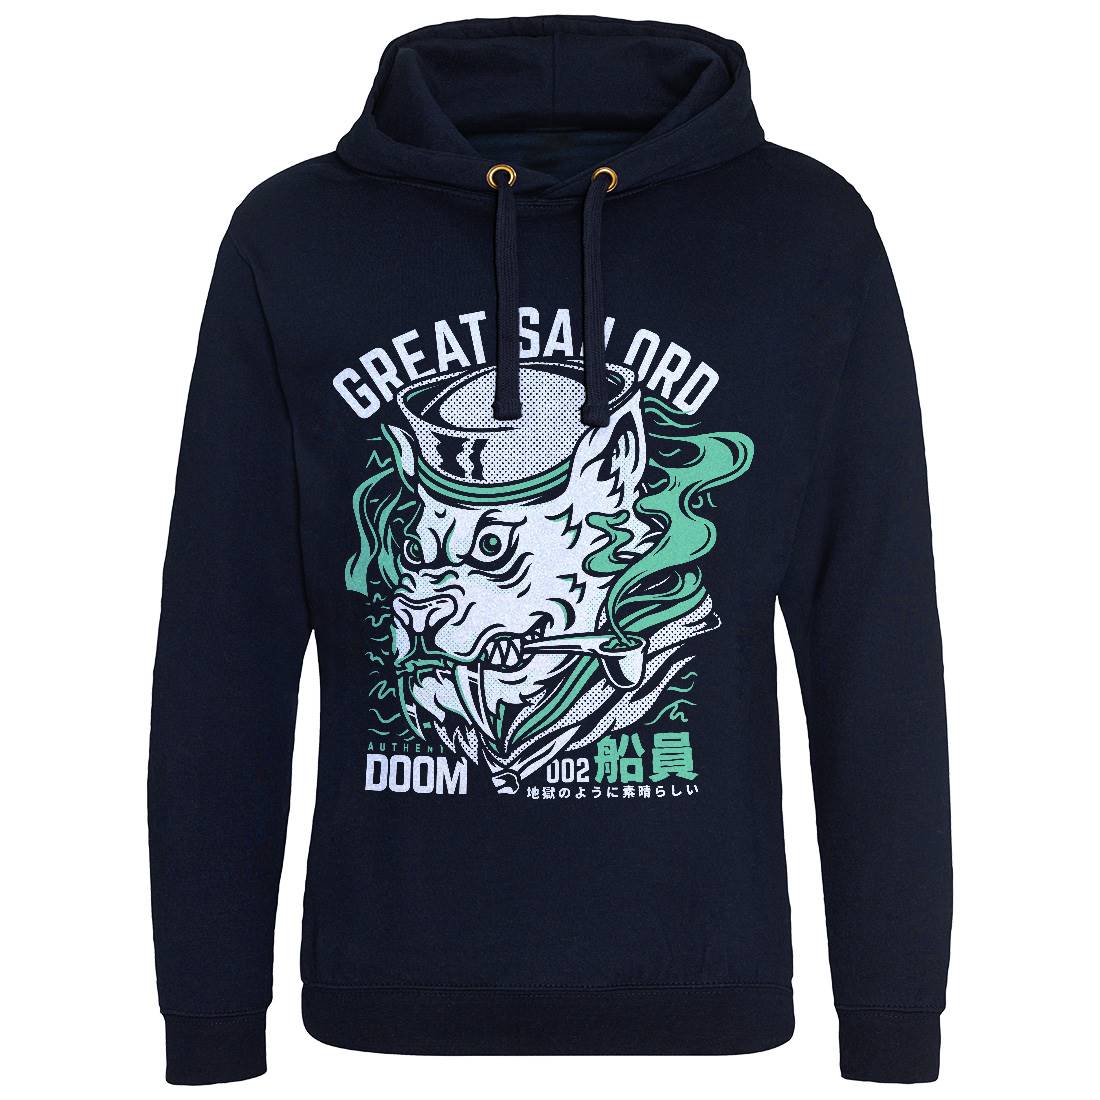 Great Sailord Mens Hoodie Without Pocket Navy D601